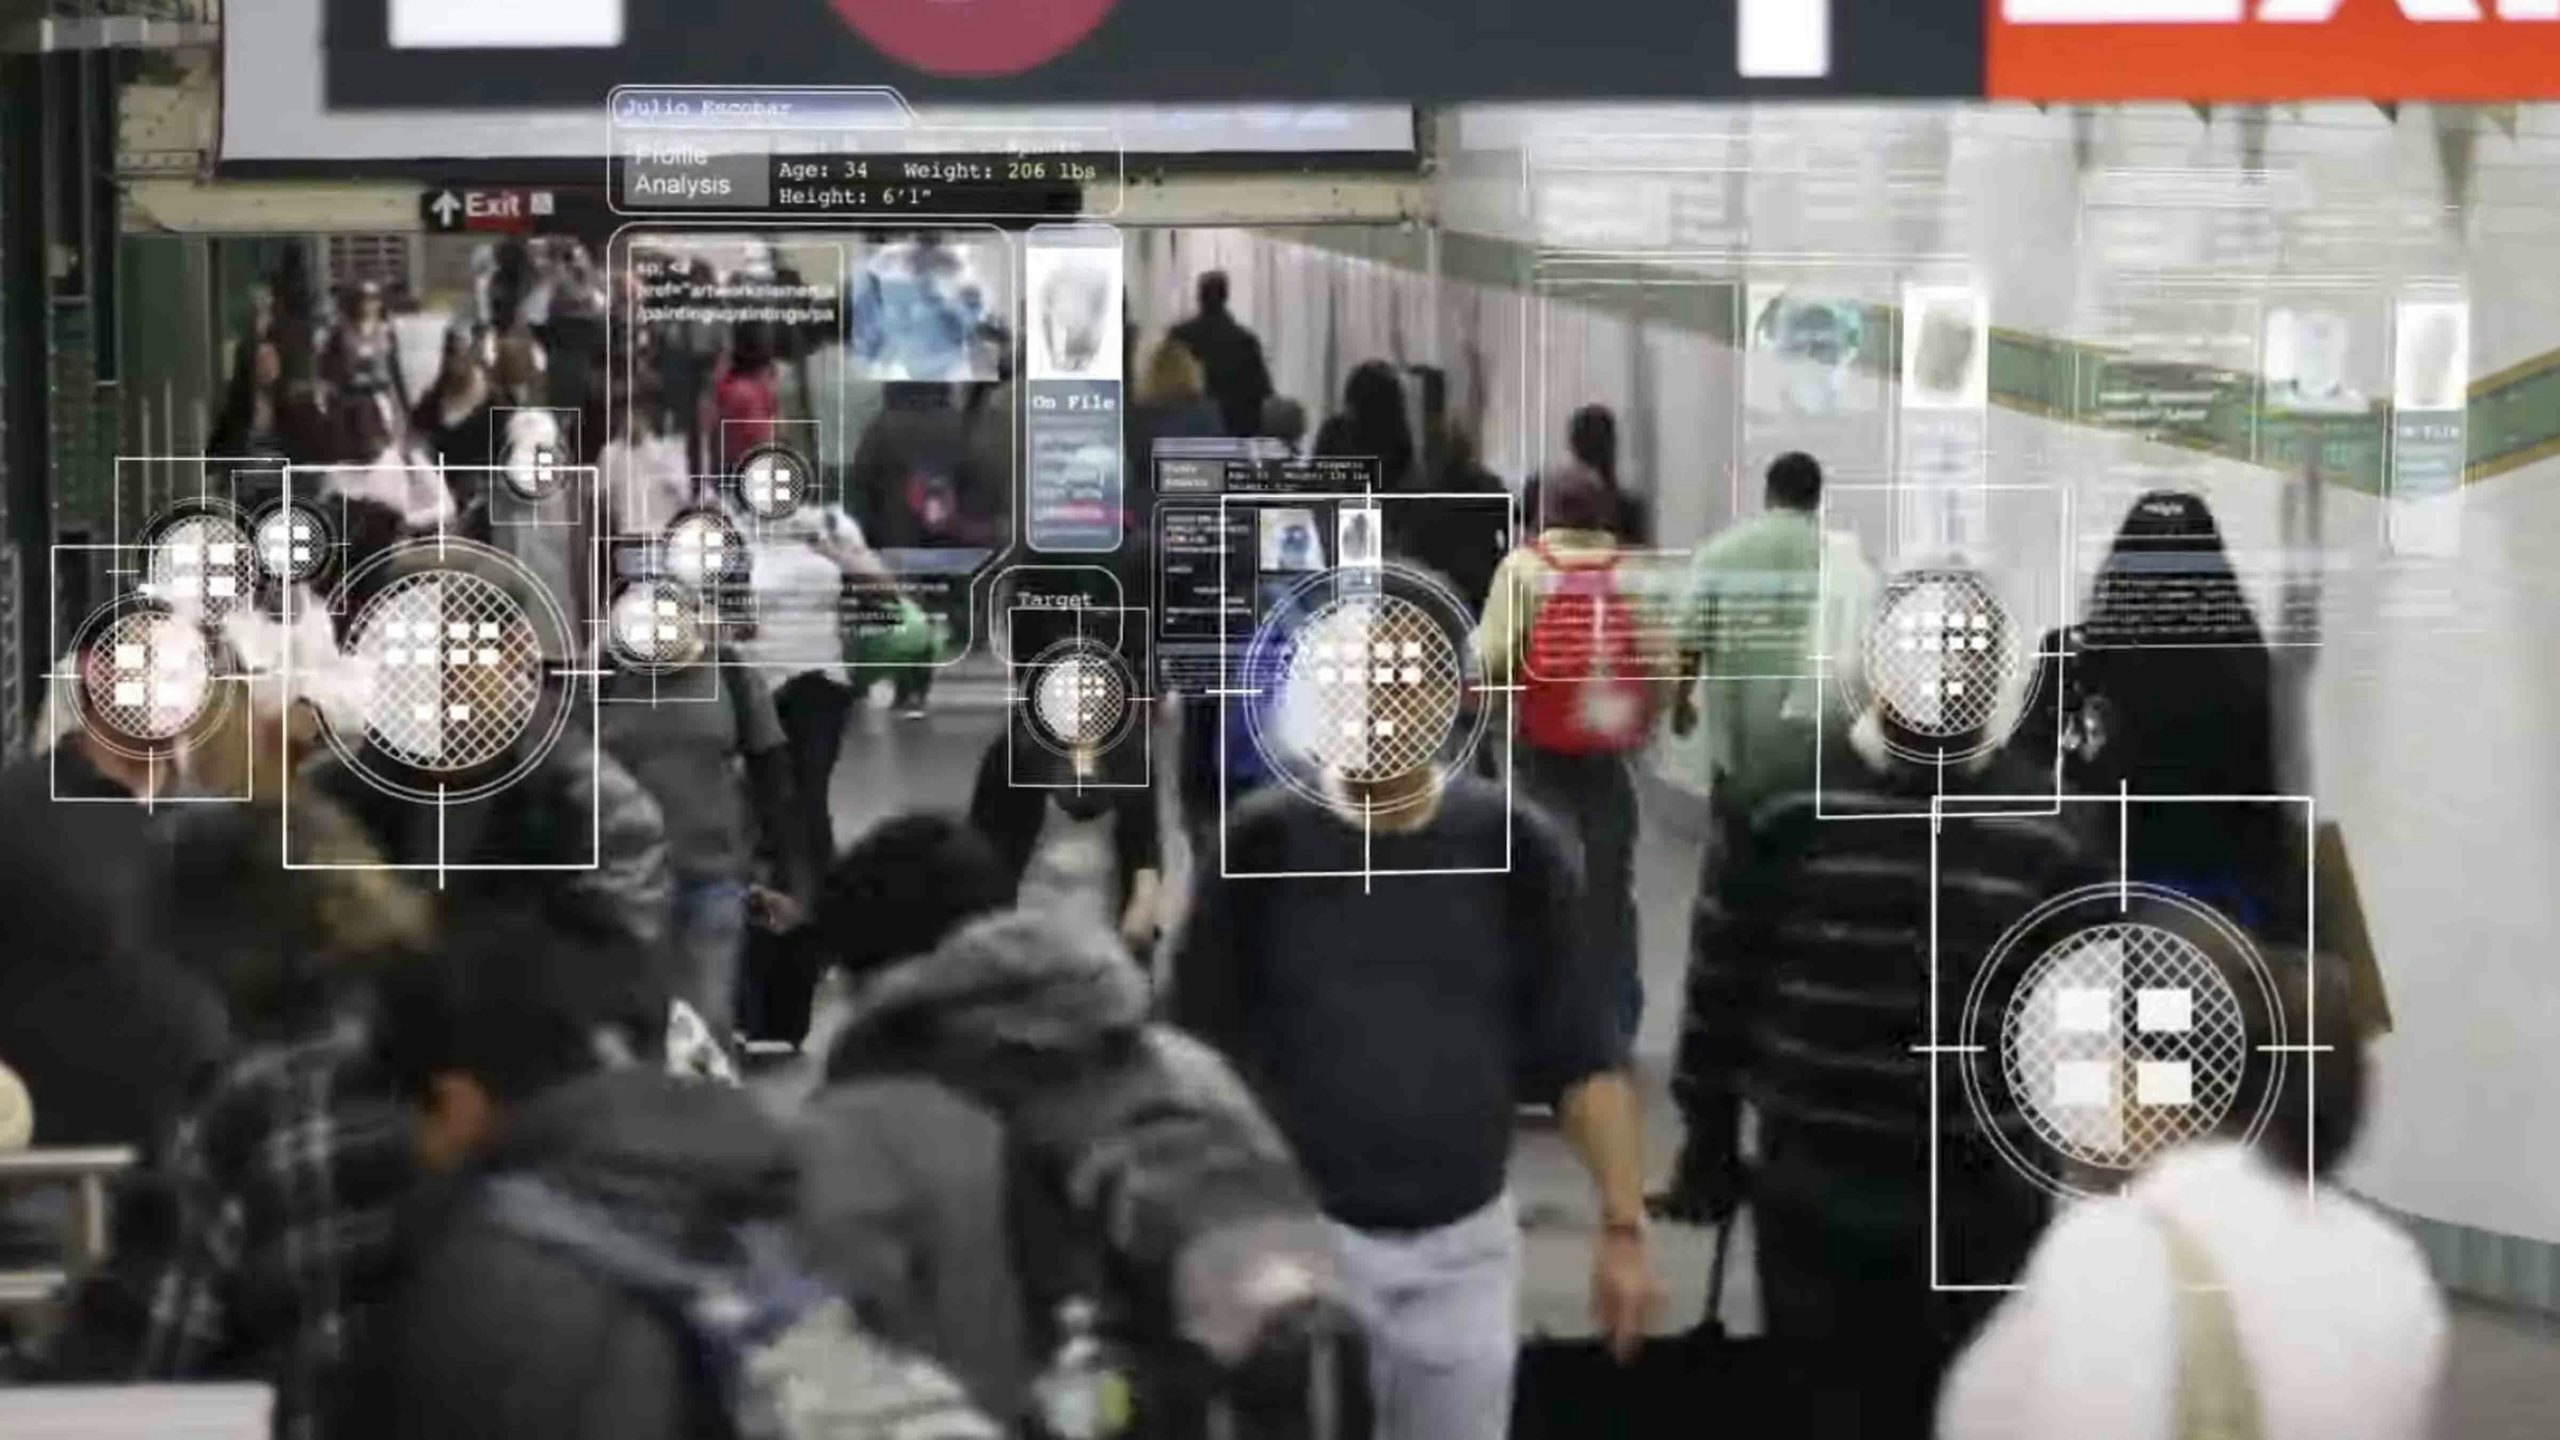 Facial recognition software scaled